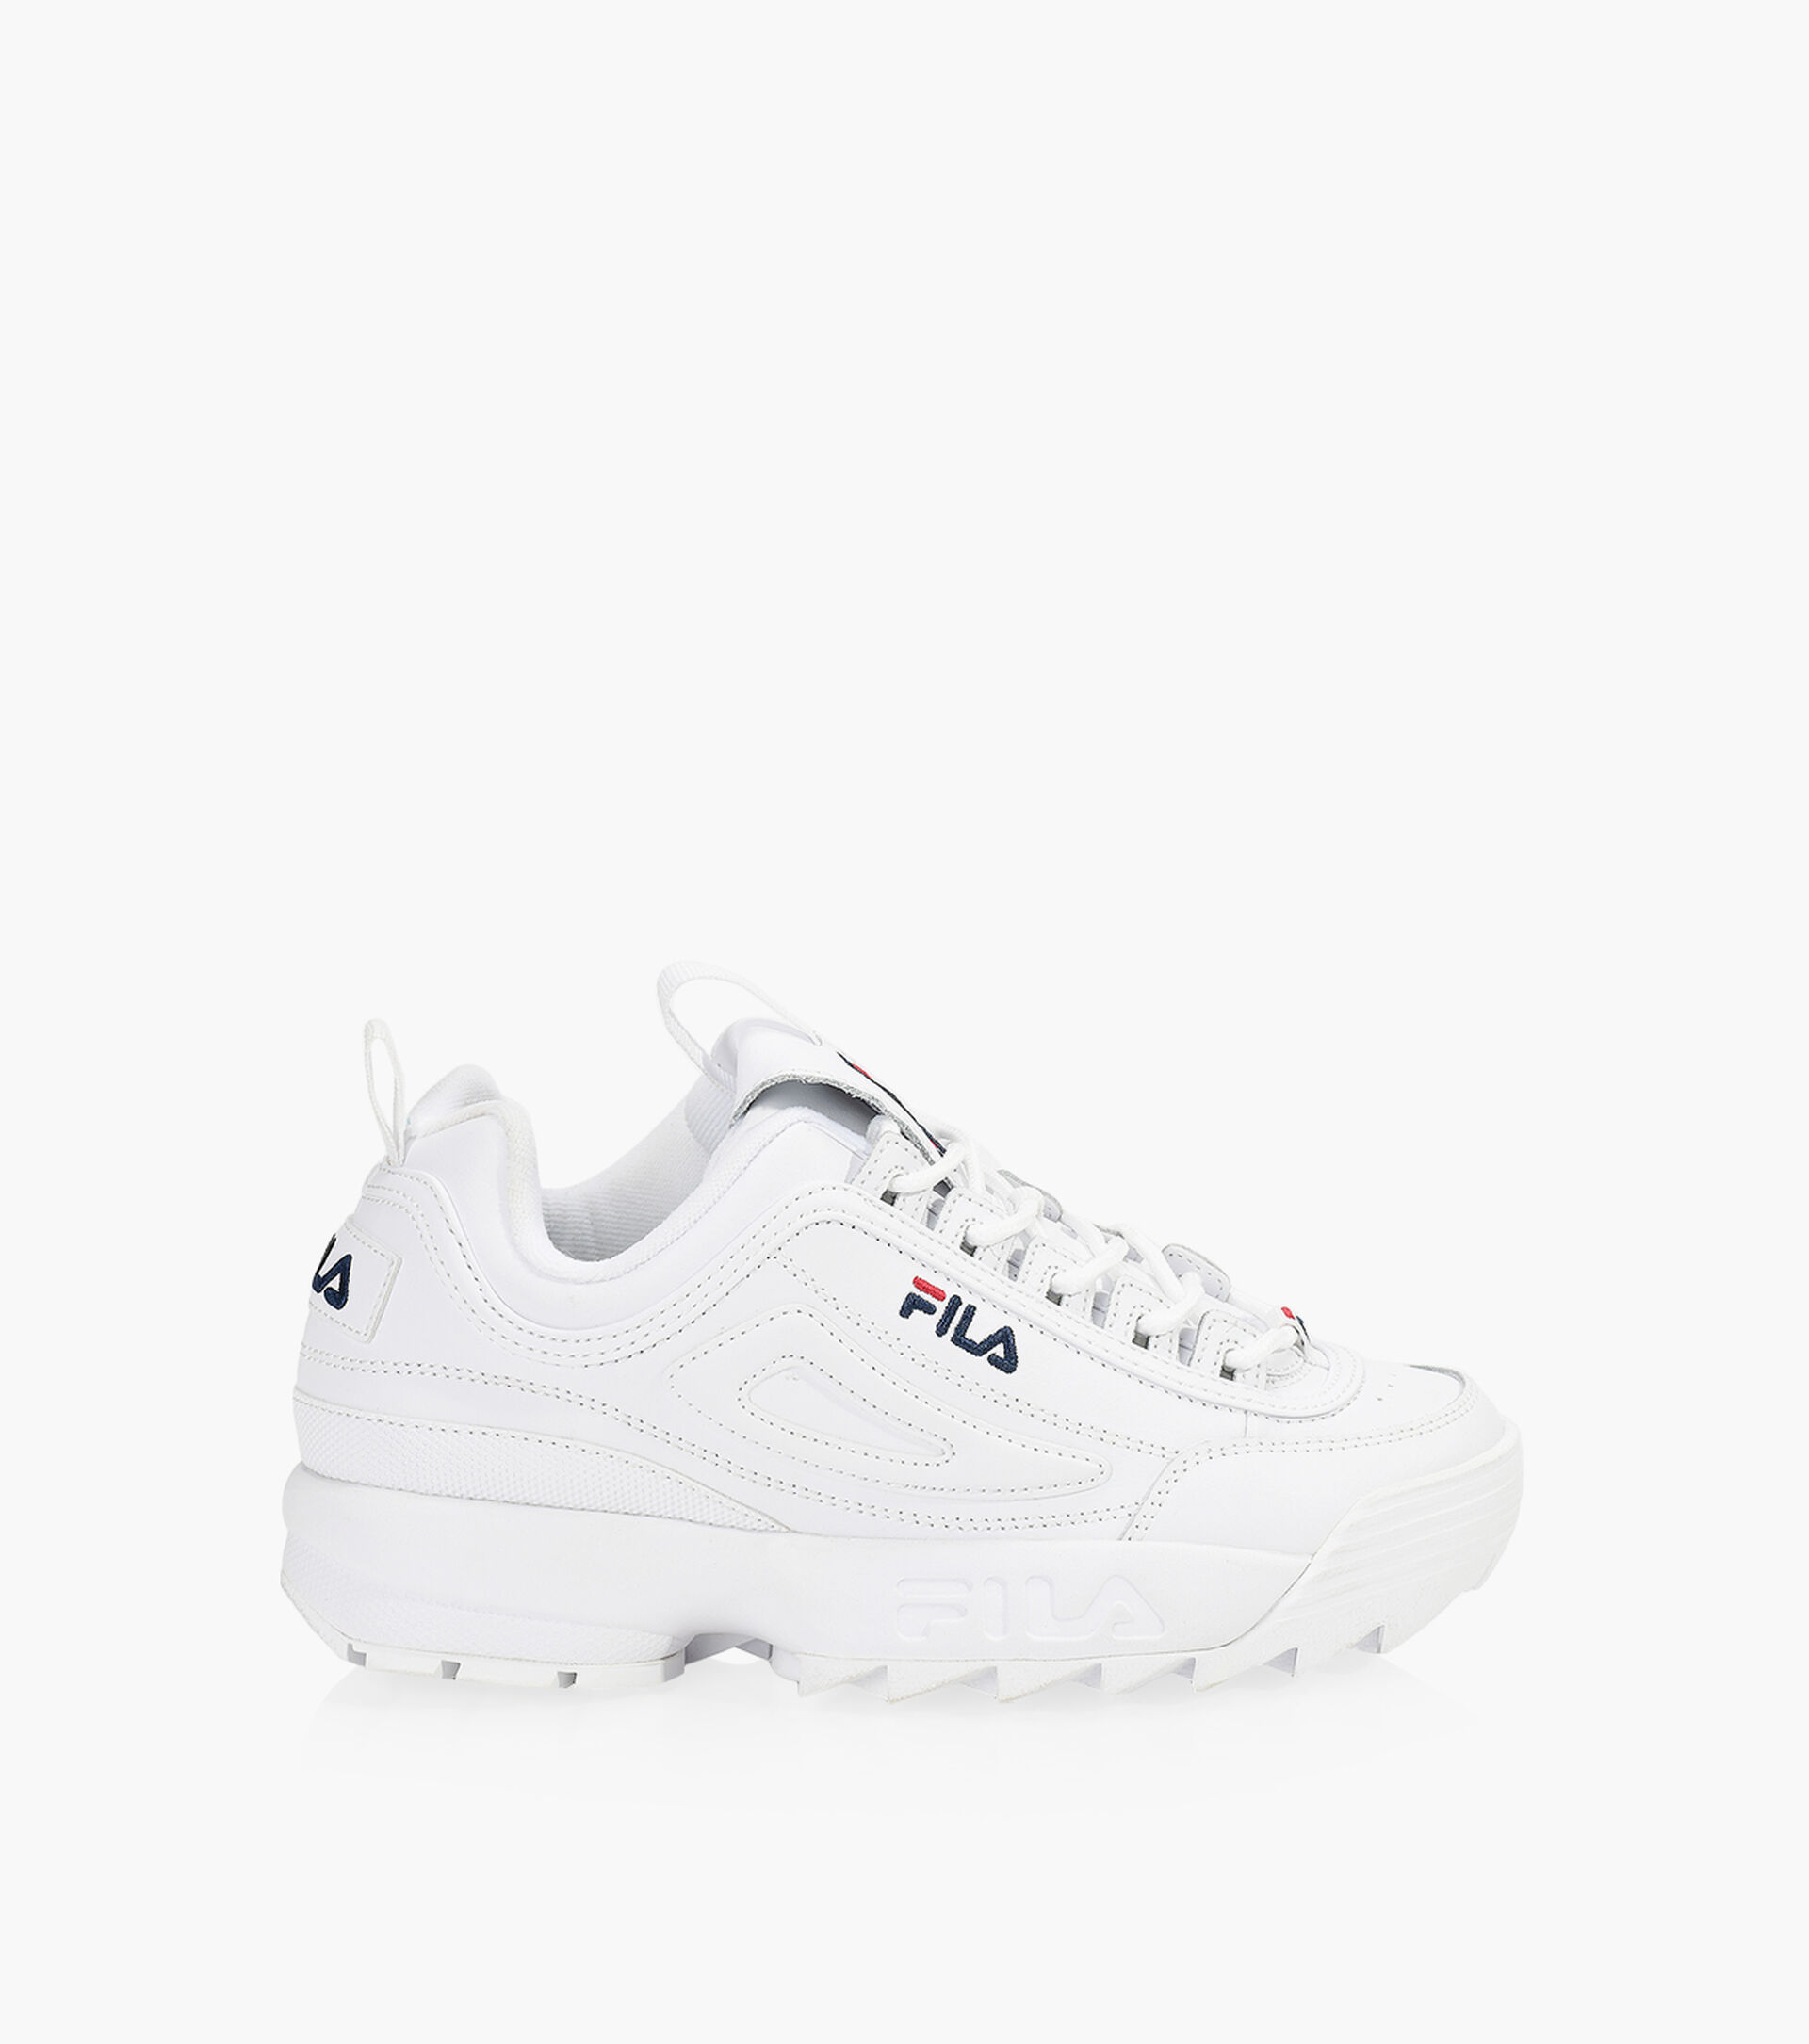 FILA DISRUPTOR 2 - Leather + | Browns Shoes